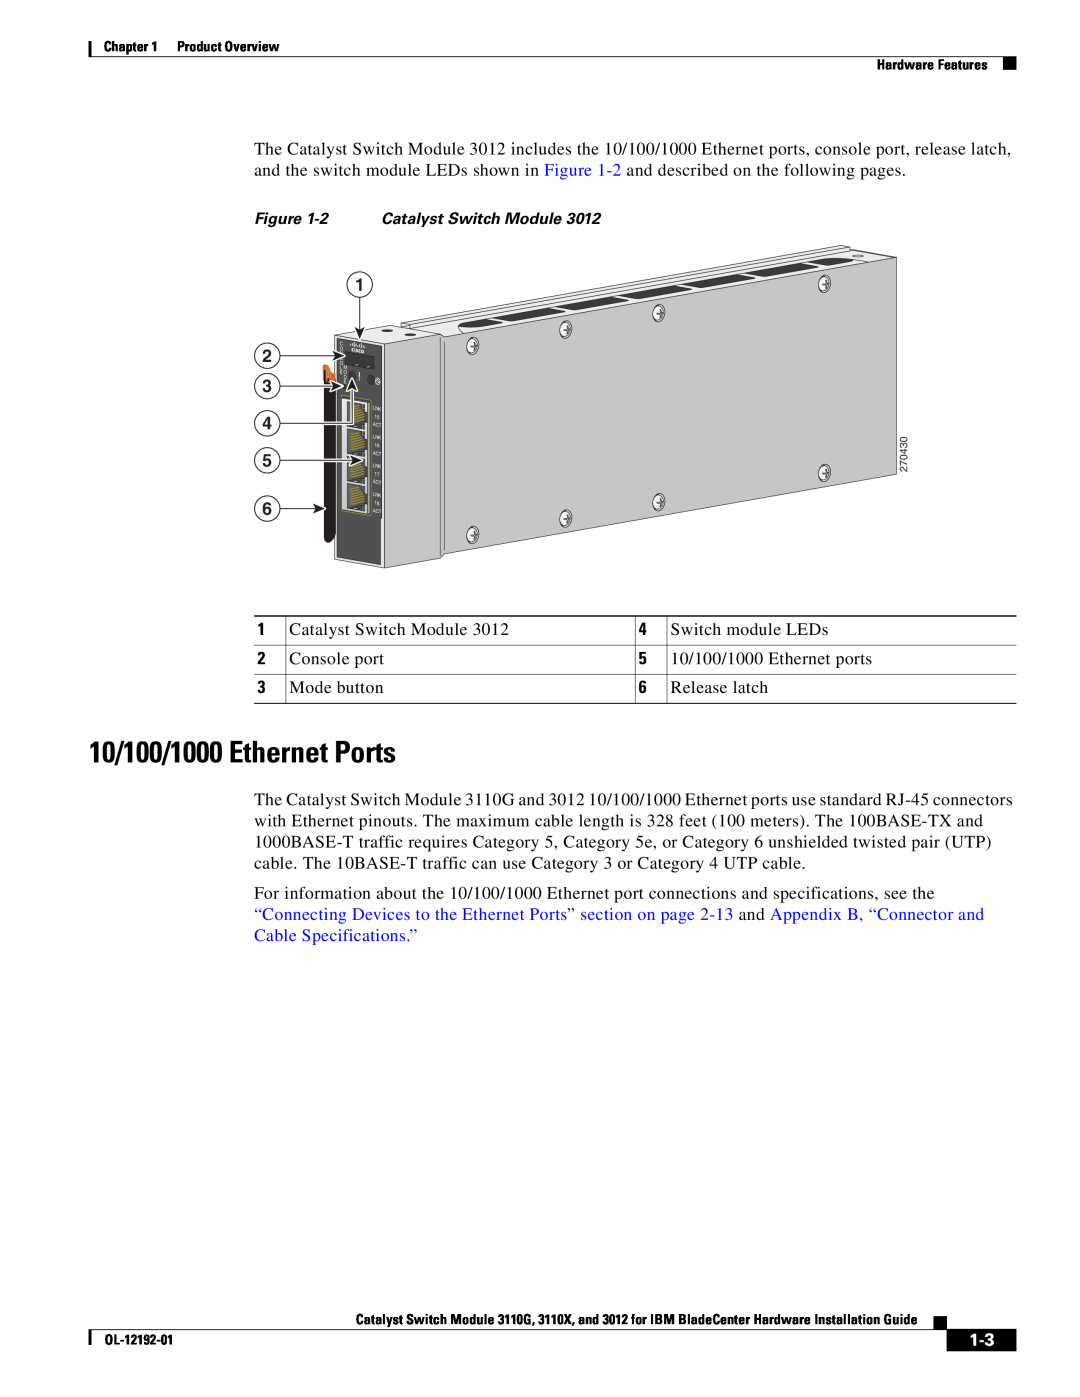 Cisco Systems 3110X 10/100/1000 Ethernet Ports, 2 Catalyst Switch Module, Product Overview Hardware Features, OL-12192-01 